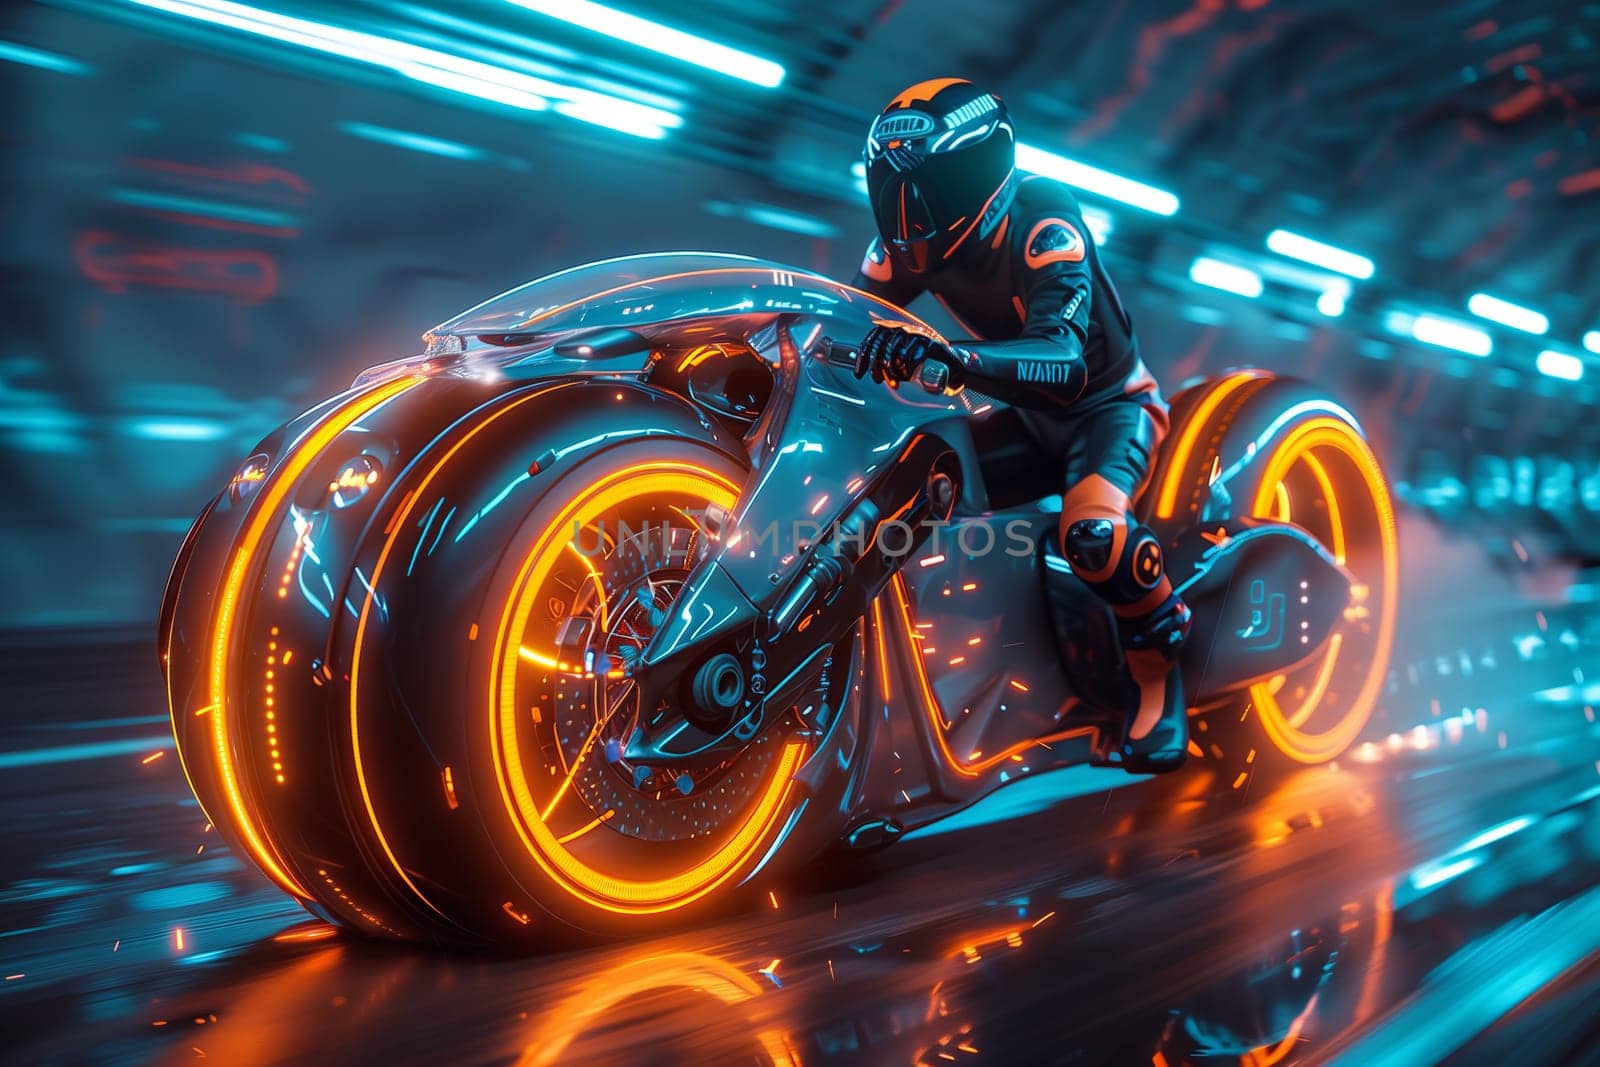 A man races on a motorcycle with neonlit wheels in a futuristic style by richwolf